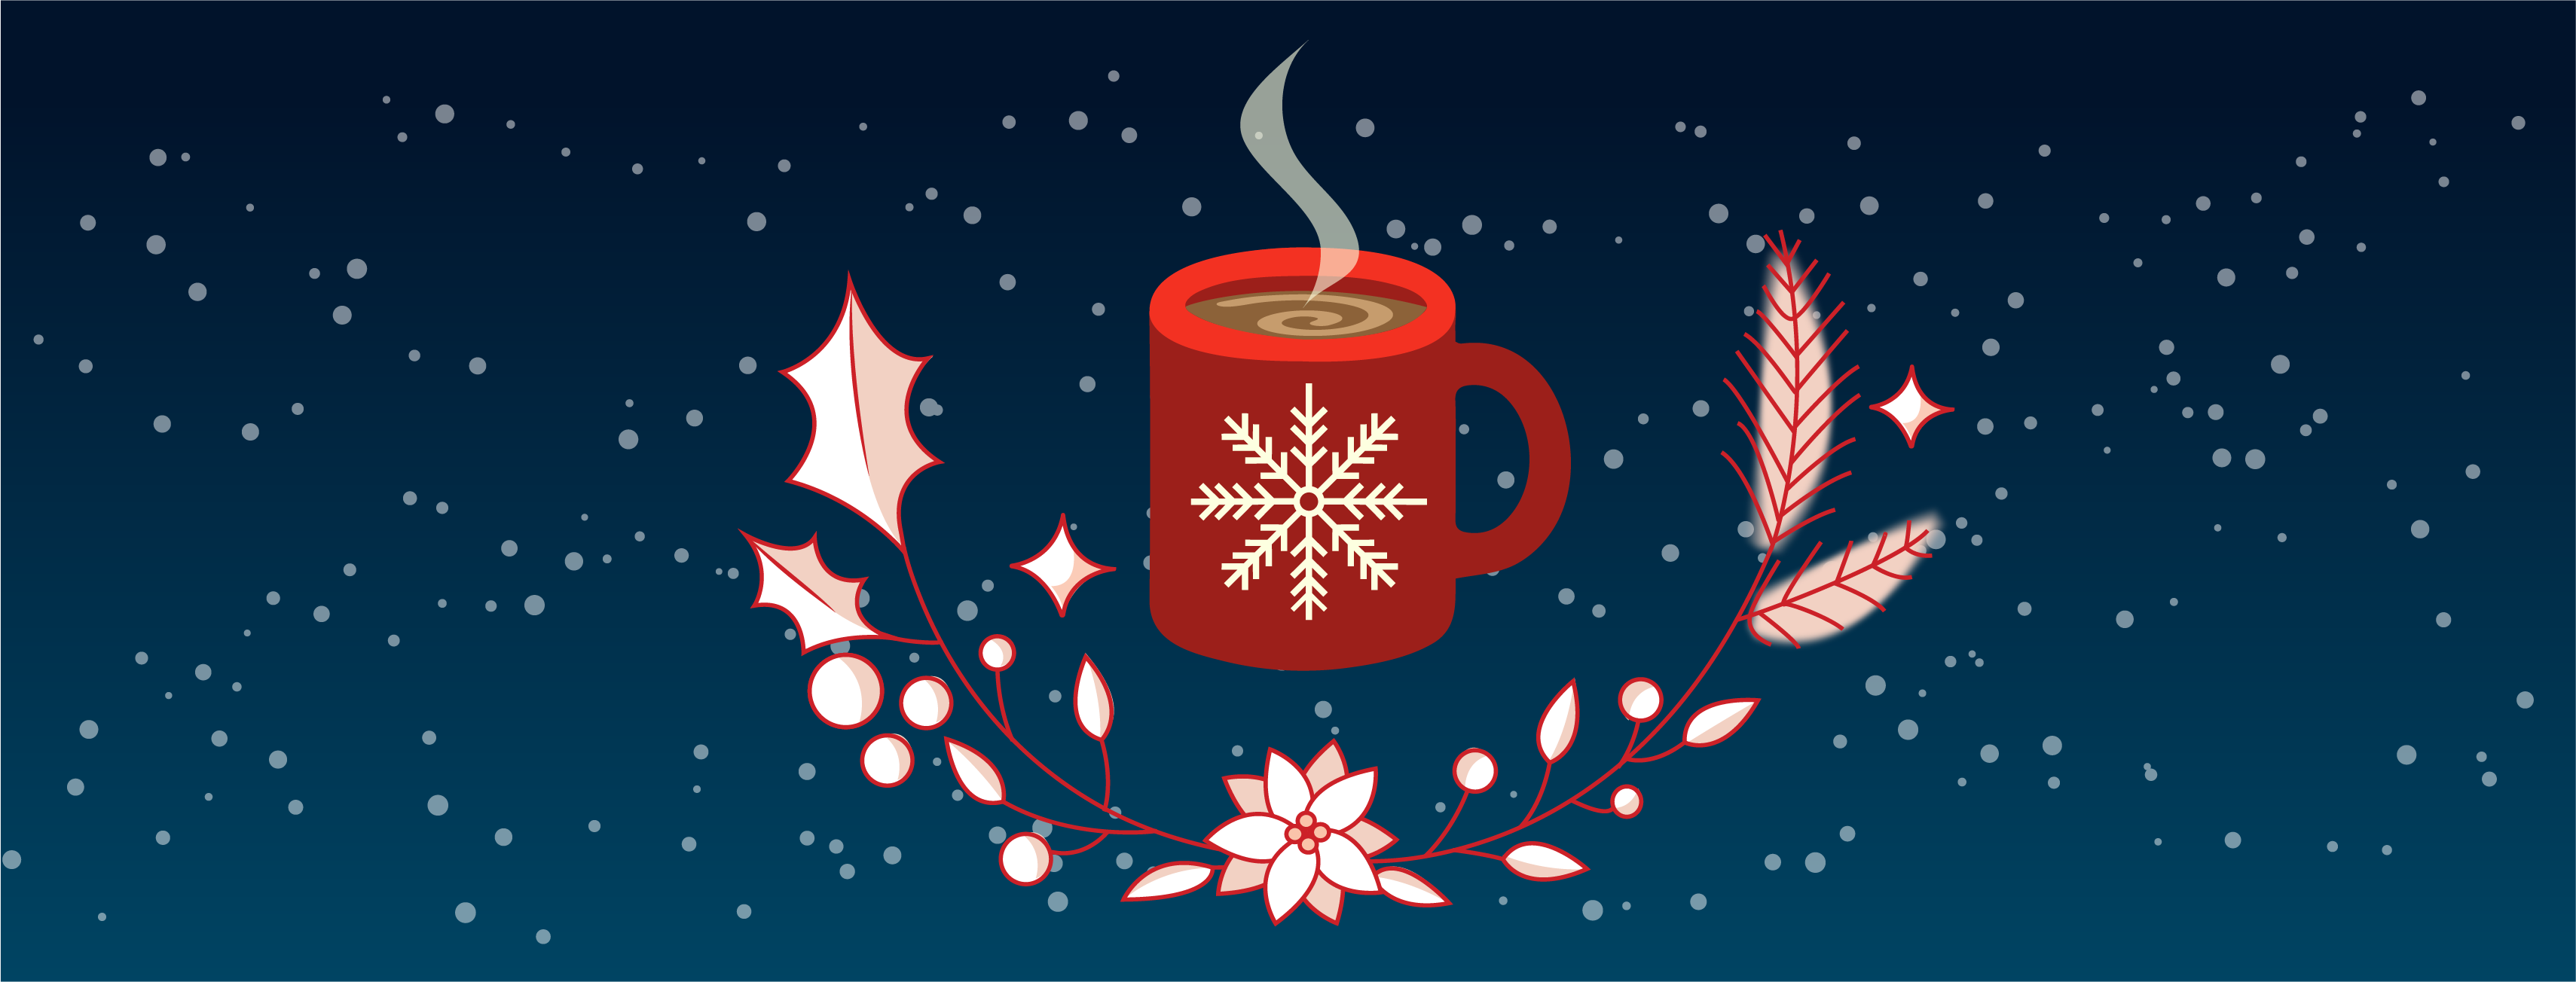 Digital art banner of a red cup of steaming hot chocolate. Underneath the cup are winter decorative plants and vines. The background is a dark to navy blue gradient with gentle snowflakes.